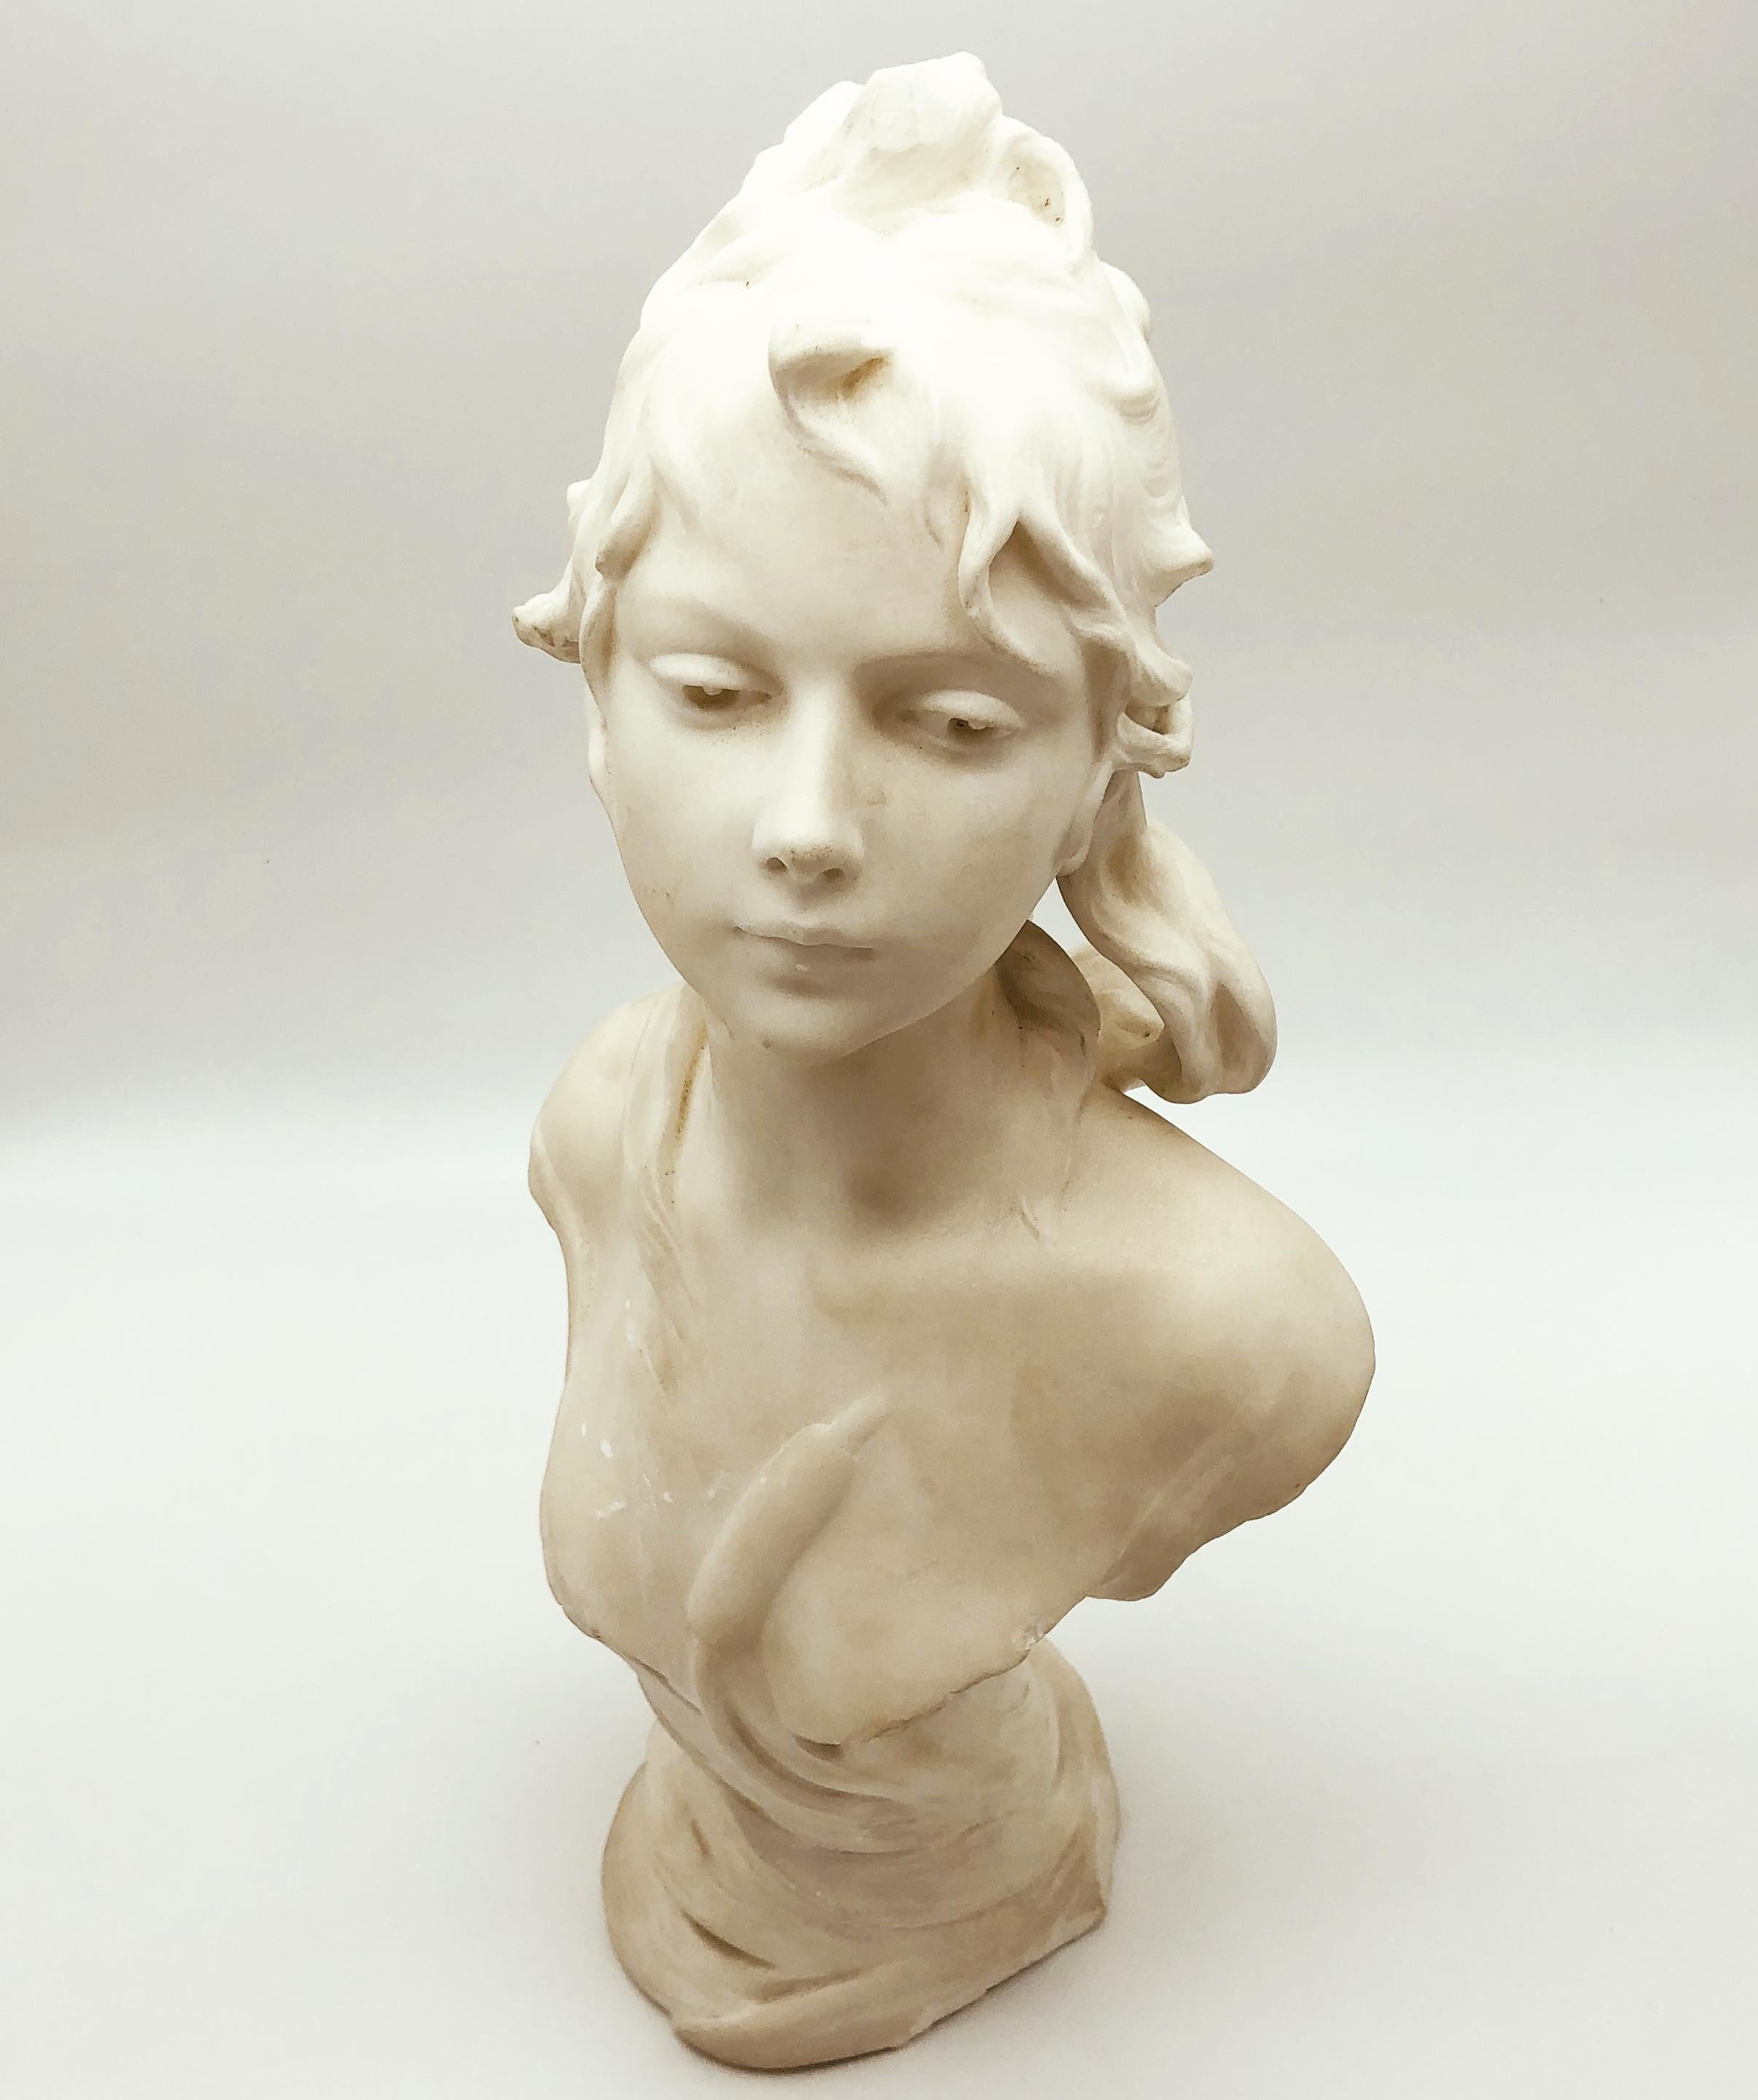 Hand-Carved 19th Century White Marble French Sculpture of Young Woman Signed Ant. Nelson